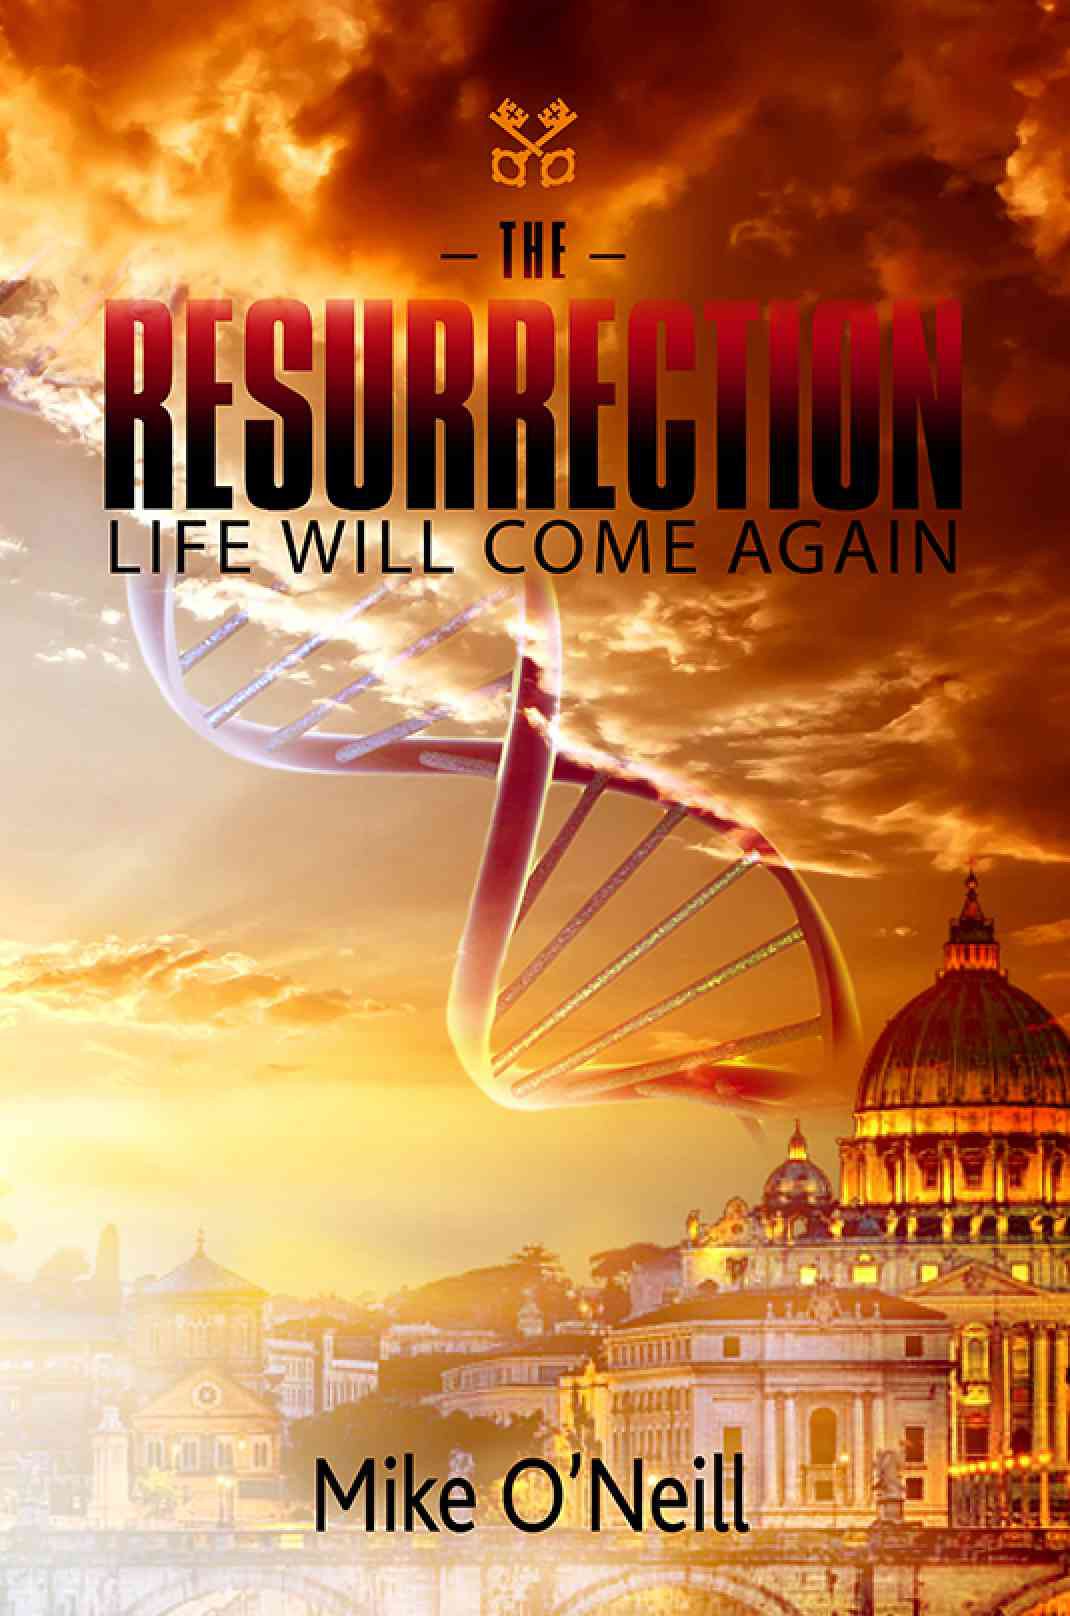 Mike O’Neill’s Book The Resurrection was Reviewed by Celticlady’s Reviews